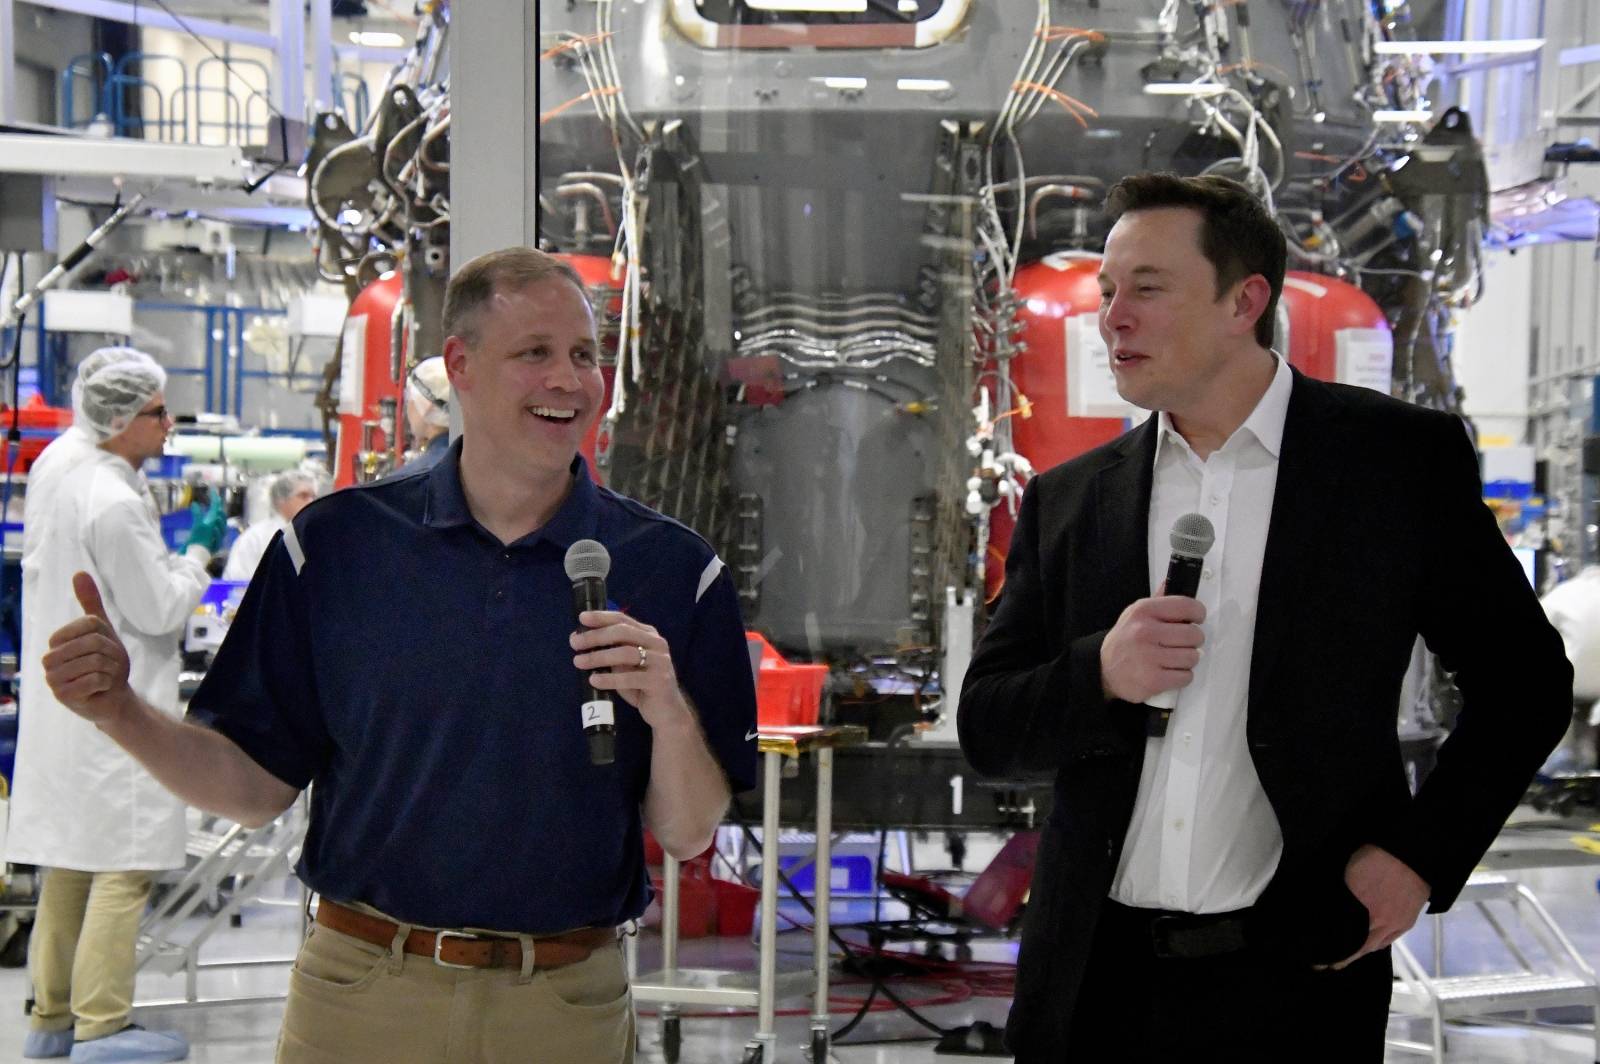 NASA Administrator Jim Bridenstine and SpaceX Chief Engineer Elon Musk talk to the press after a tour of  SpaceX headquarters in Hawthorne